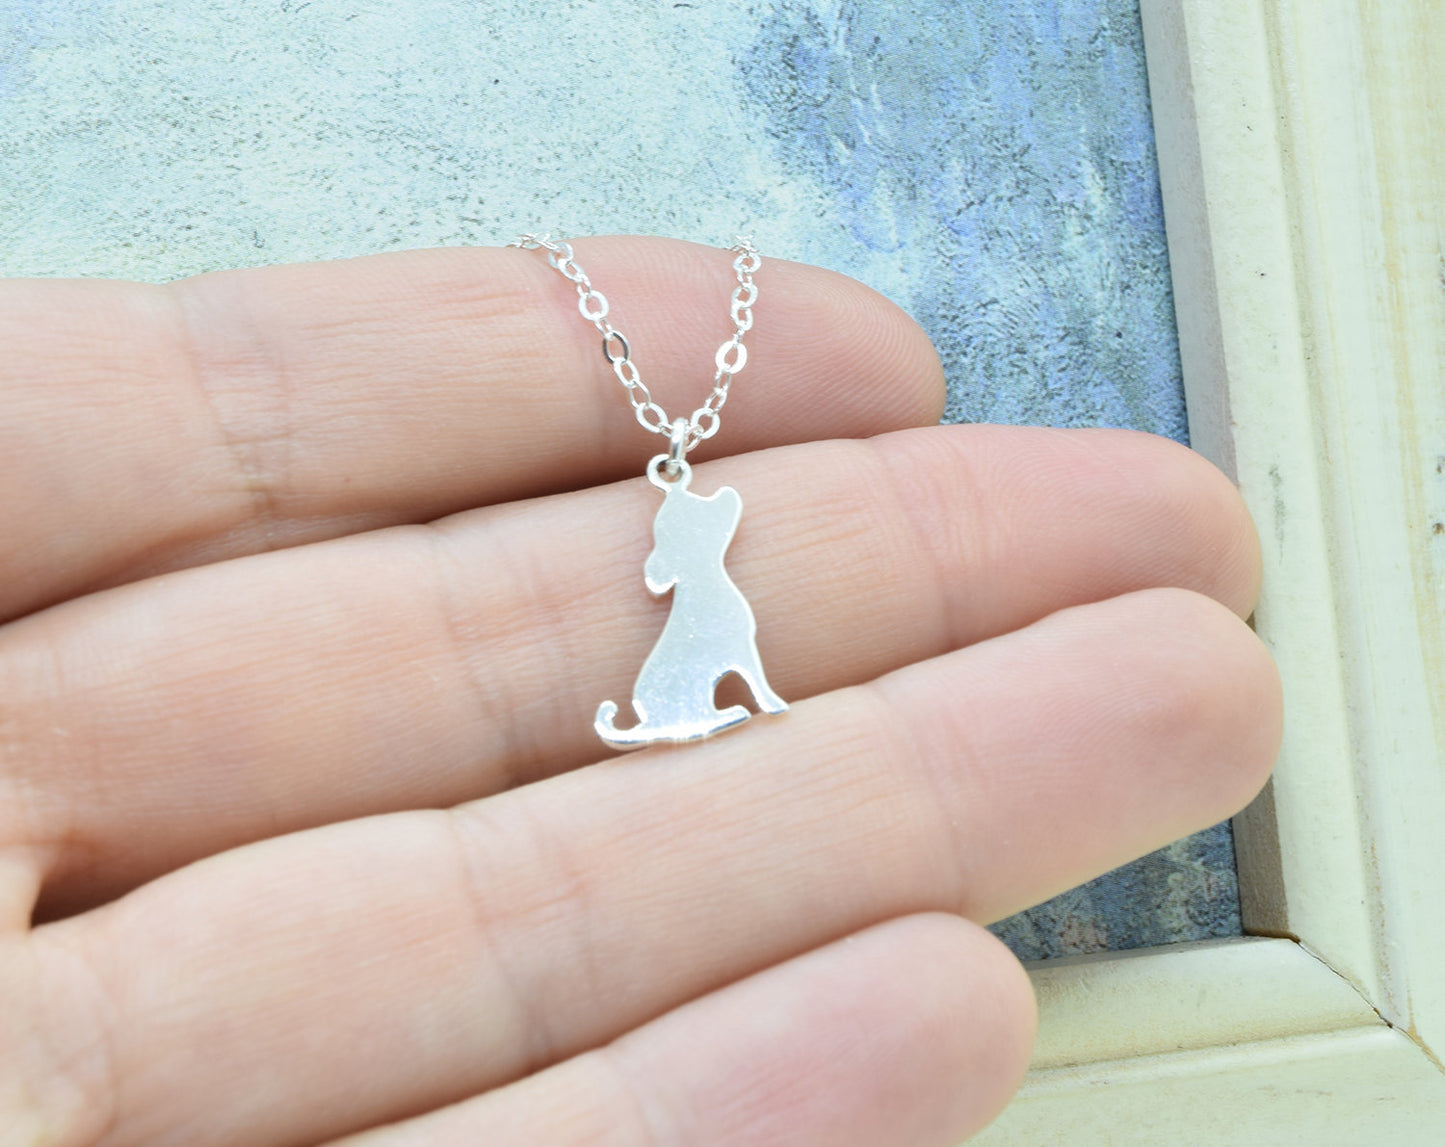 Silver Puppy Dog Charm Necklace